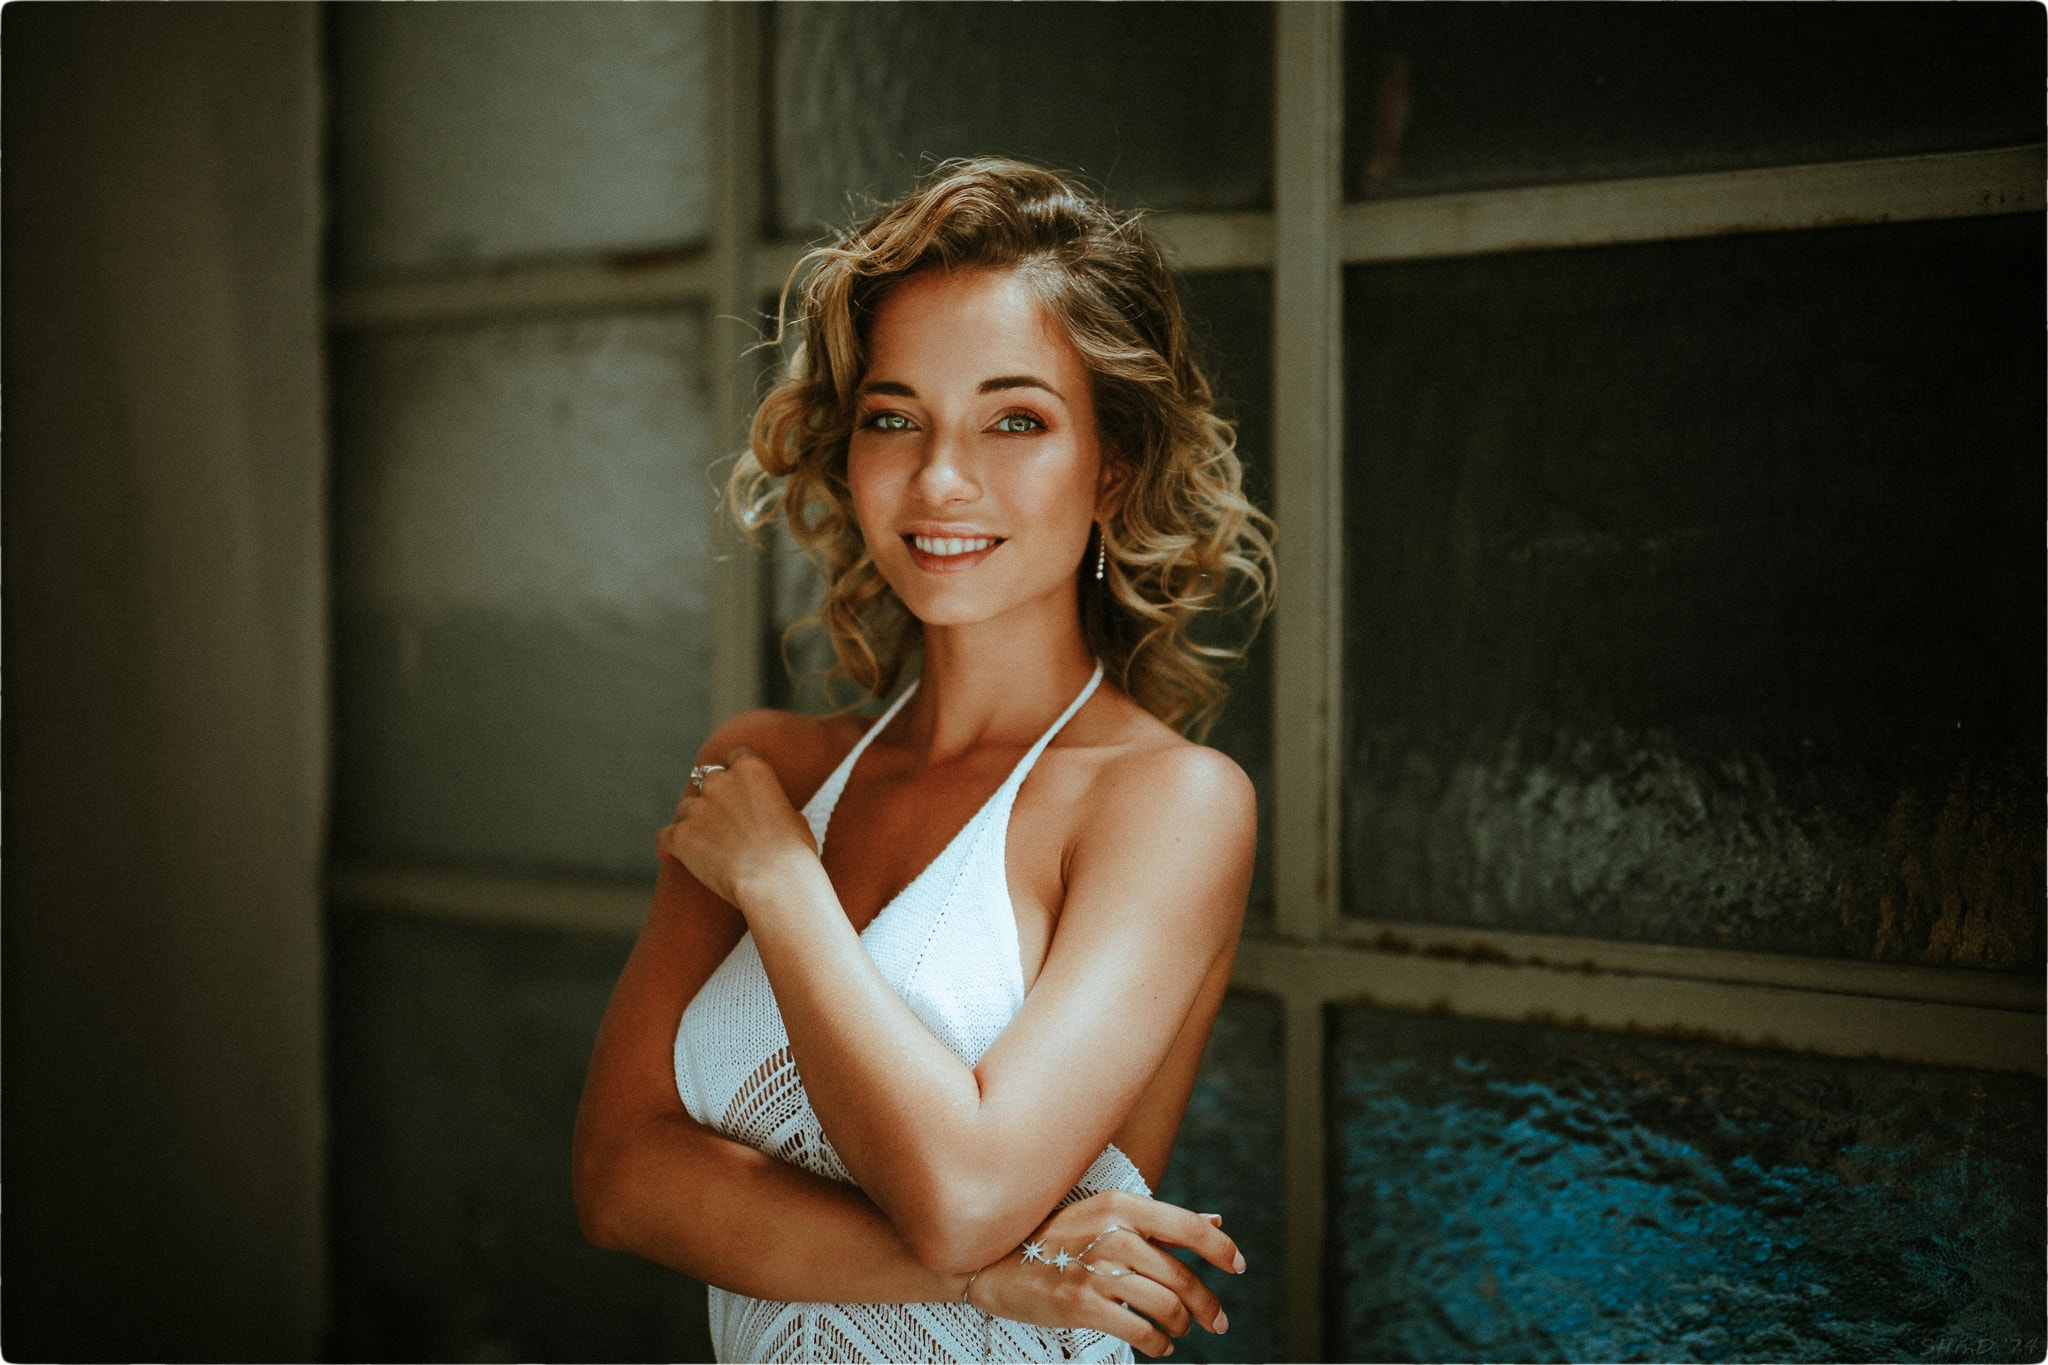 People 2048x1365 SHinD.PH women Natalia Andreeva blonde wavy hair smiling looking at viewer white clothing frame